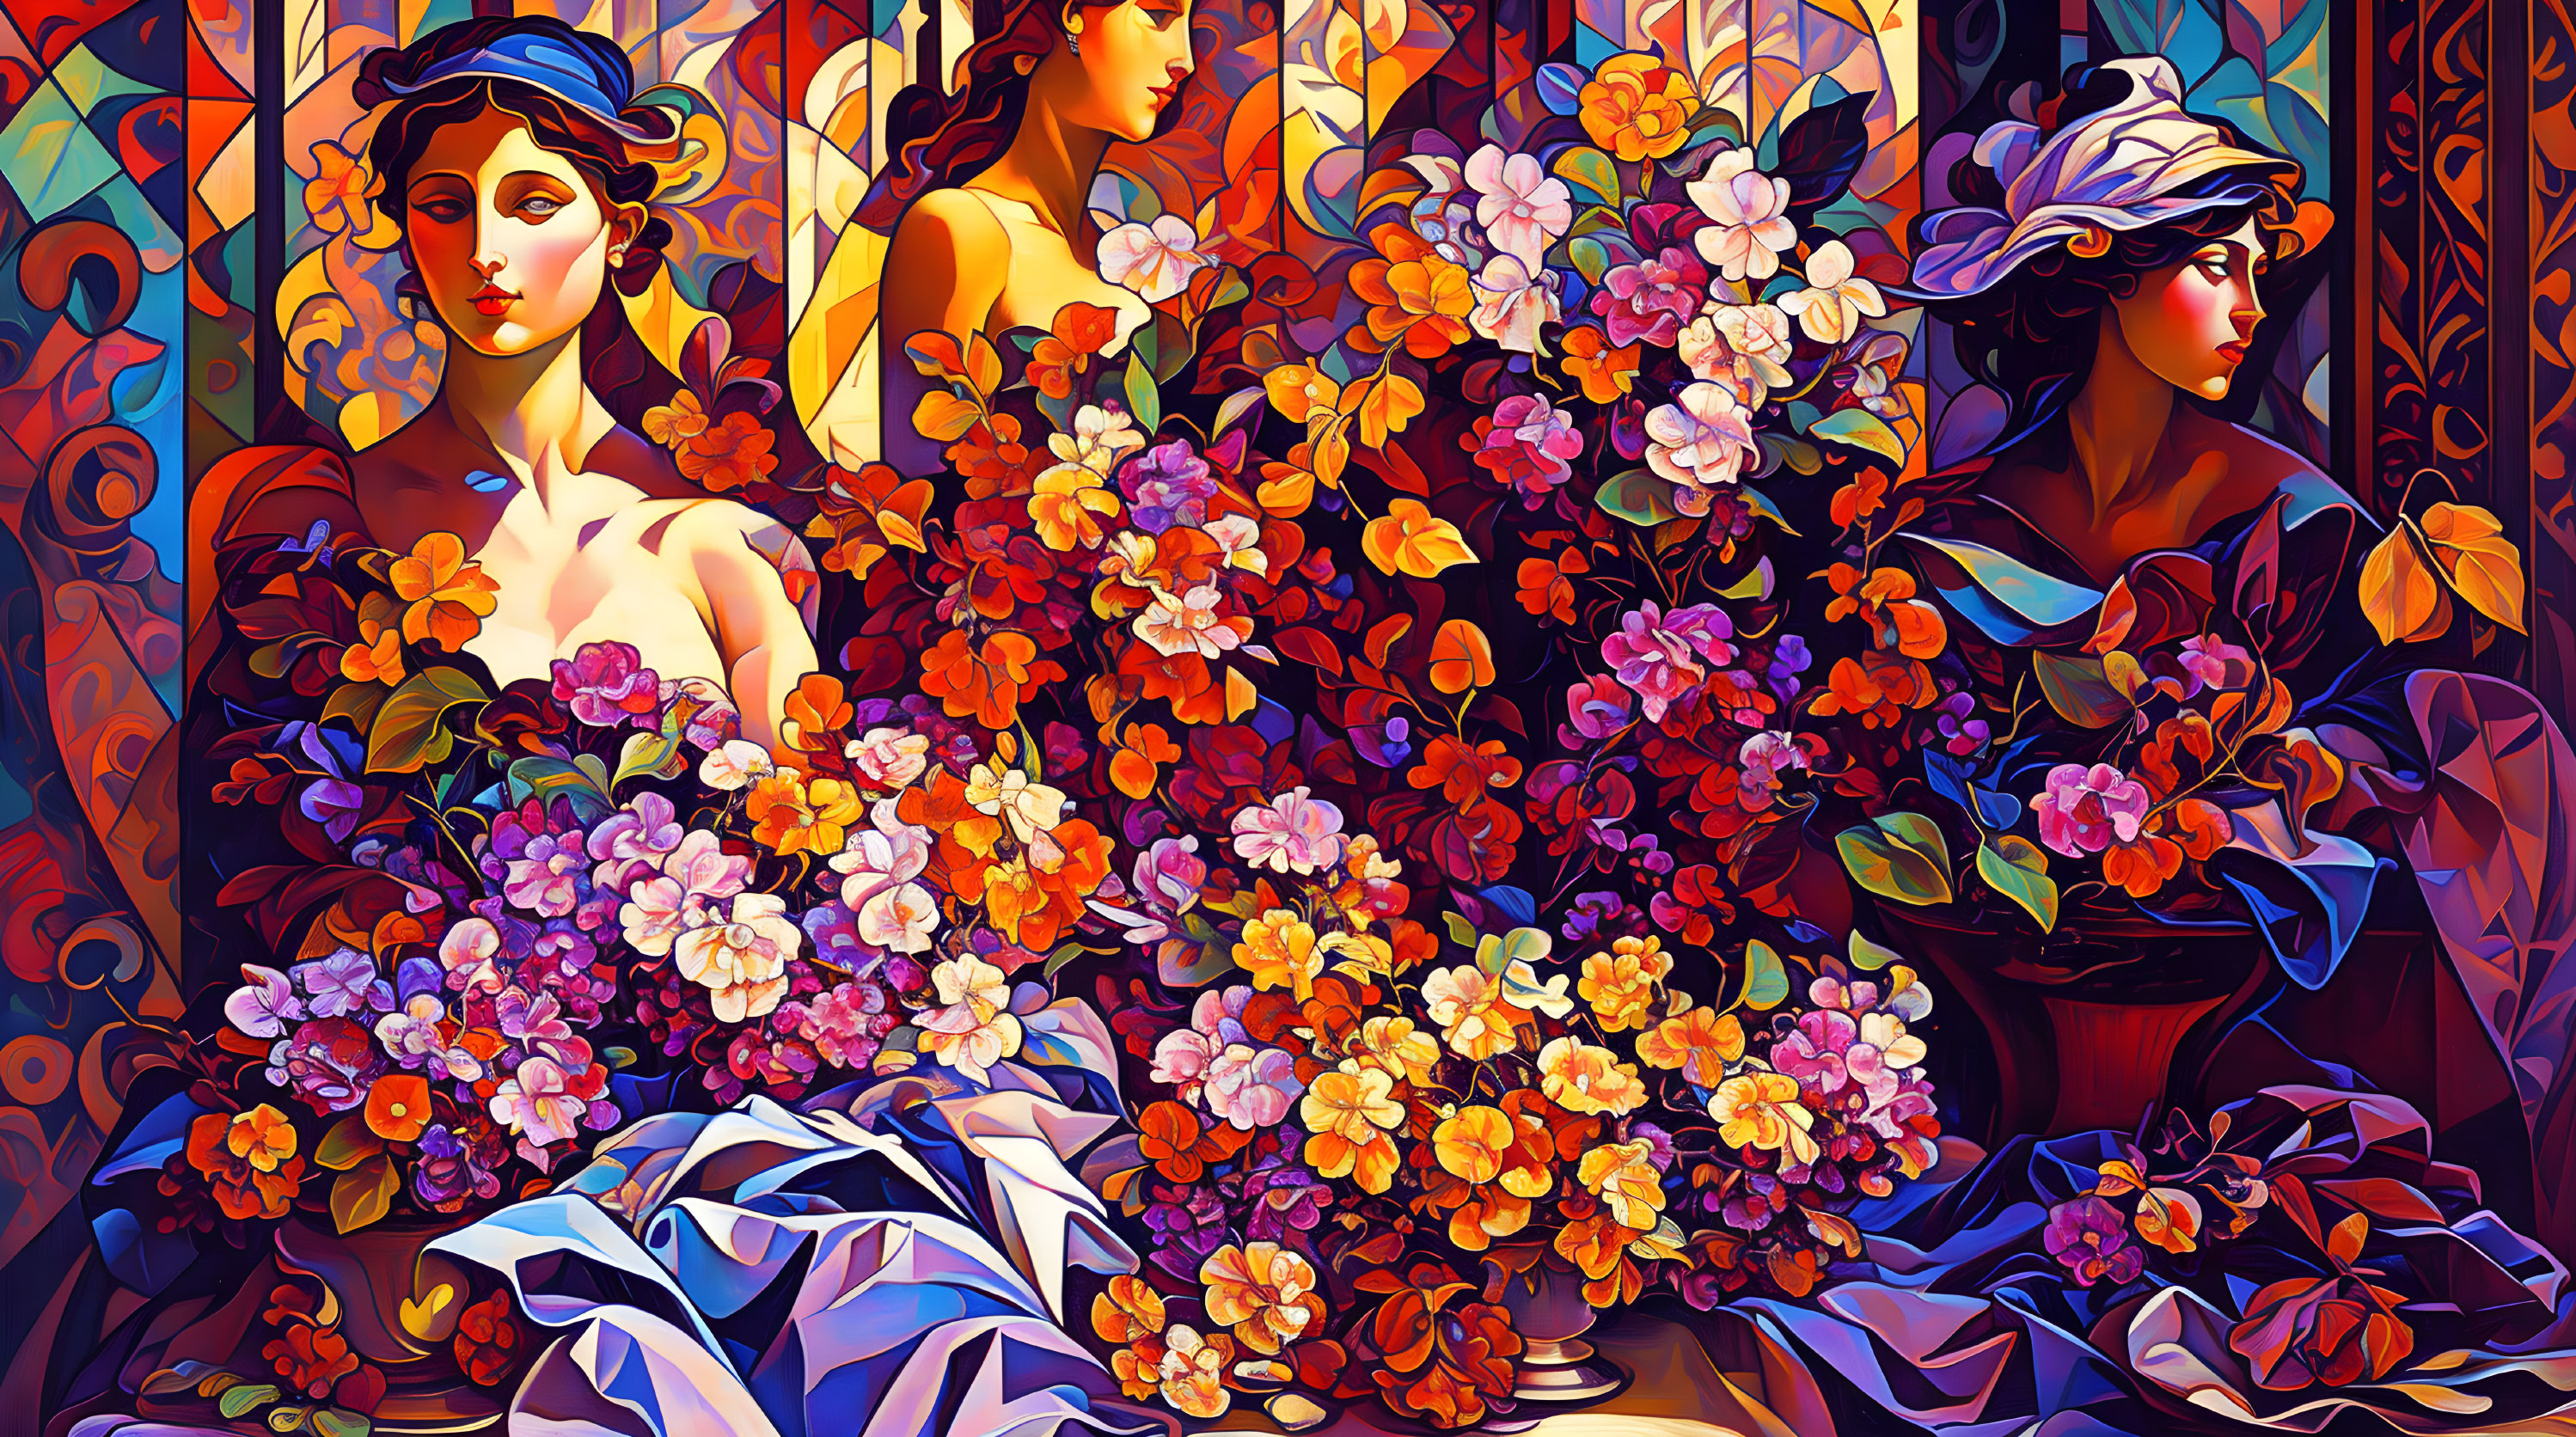 Cubist flowers with women